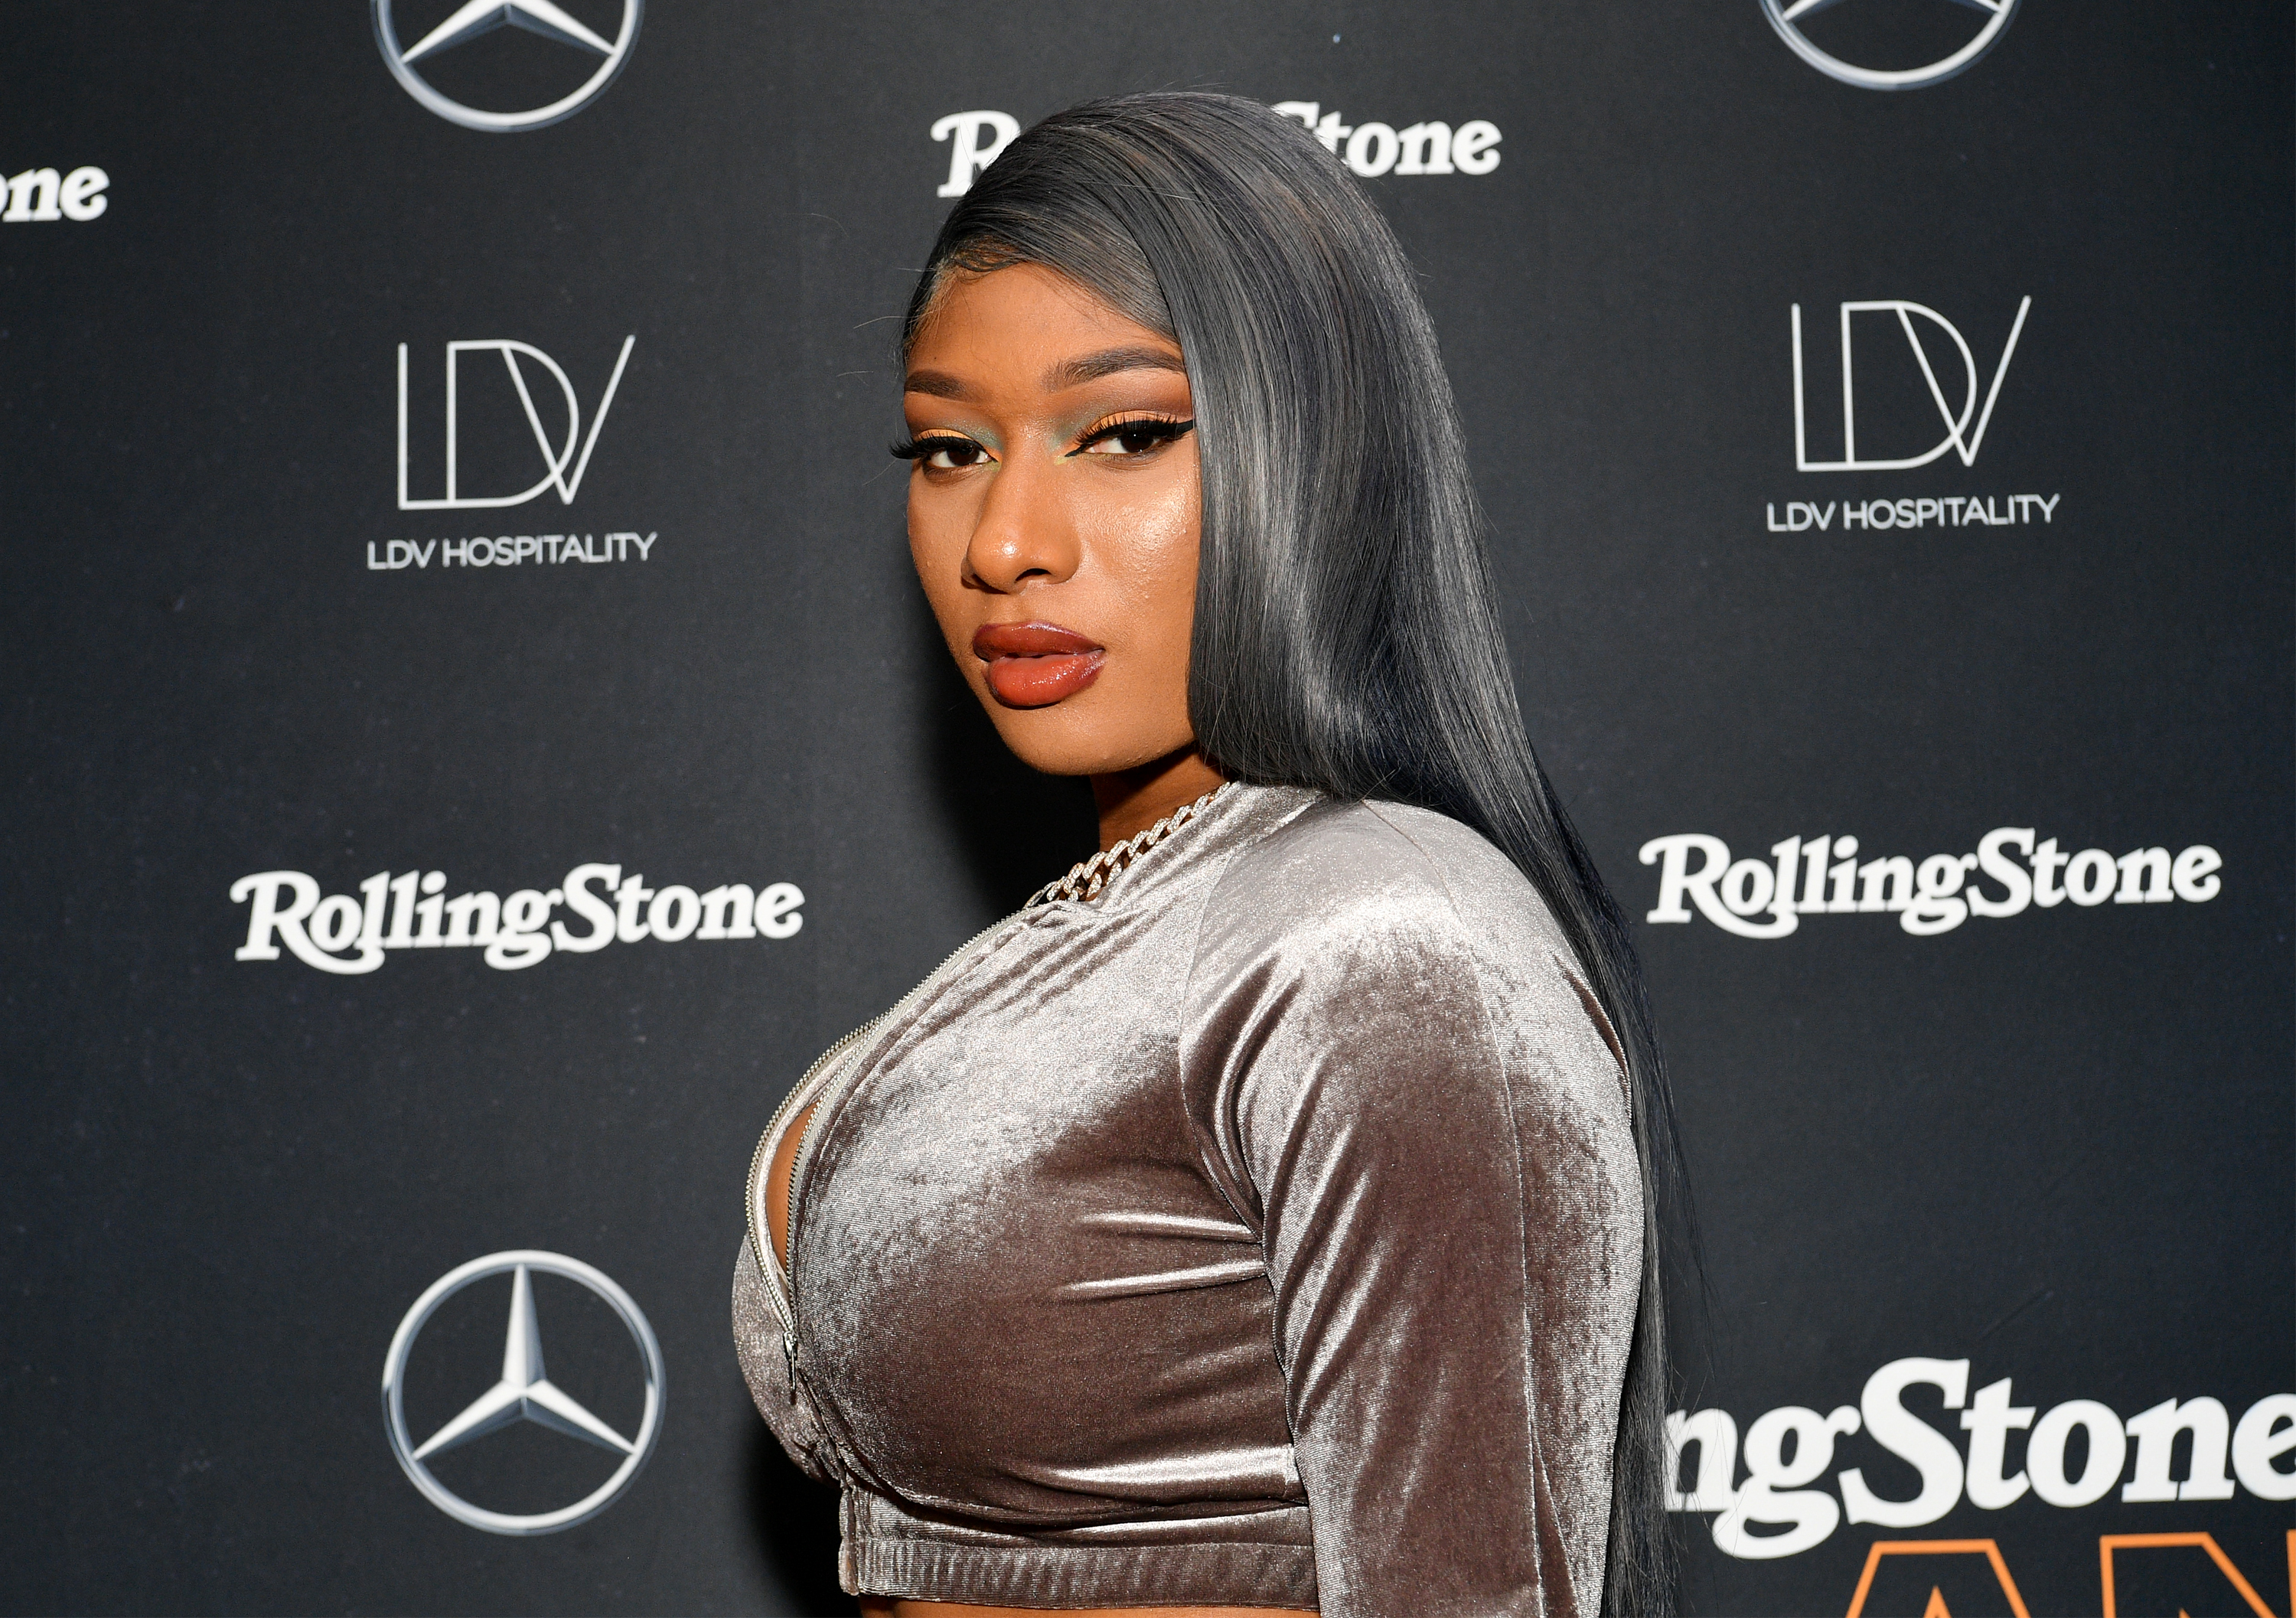 Megan Thee Stallion Addresses Tory Lanez Shooting: 'I Have Truly Survived the Unimaginable'